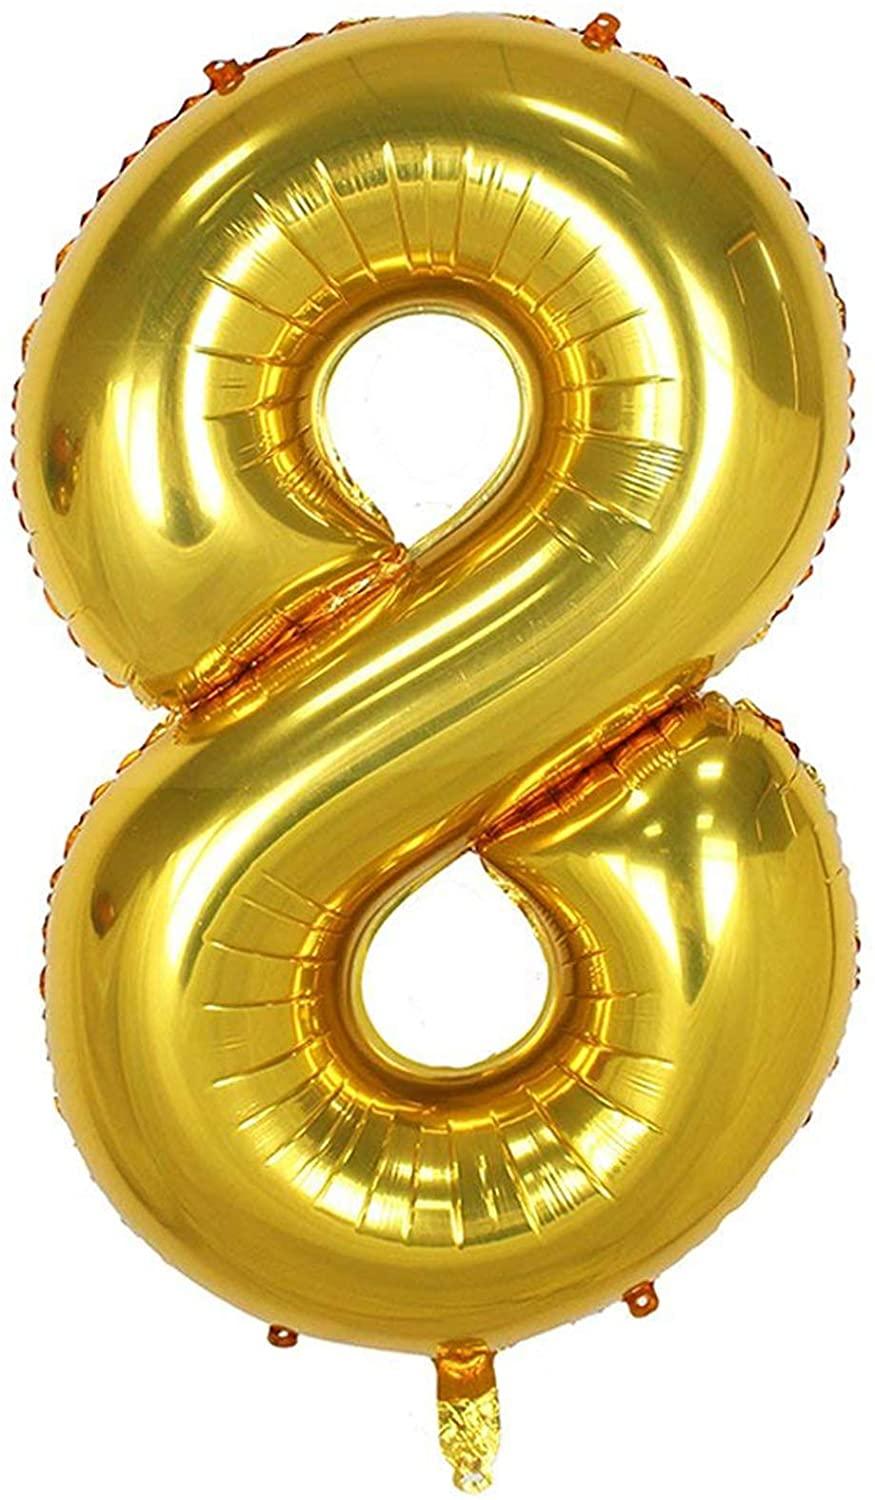 Gold Number 1 Balloon, 40 Inch - Lasercutwraps Shop